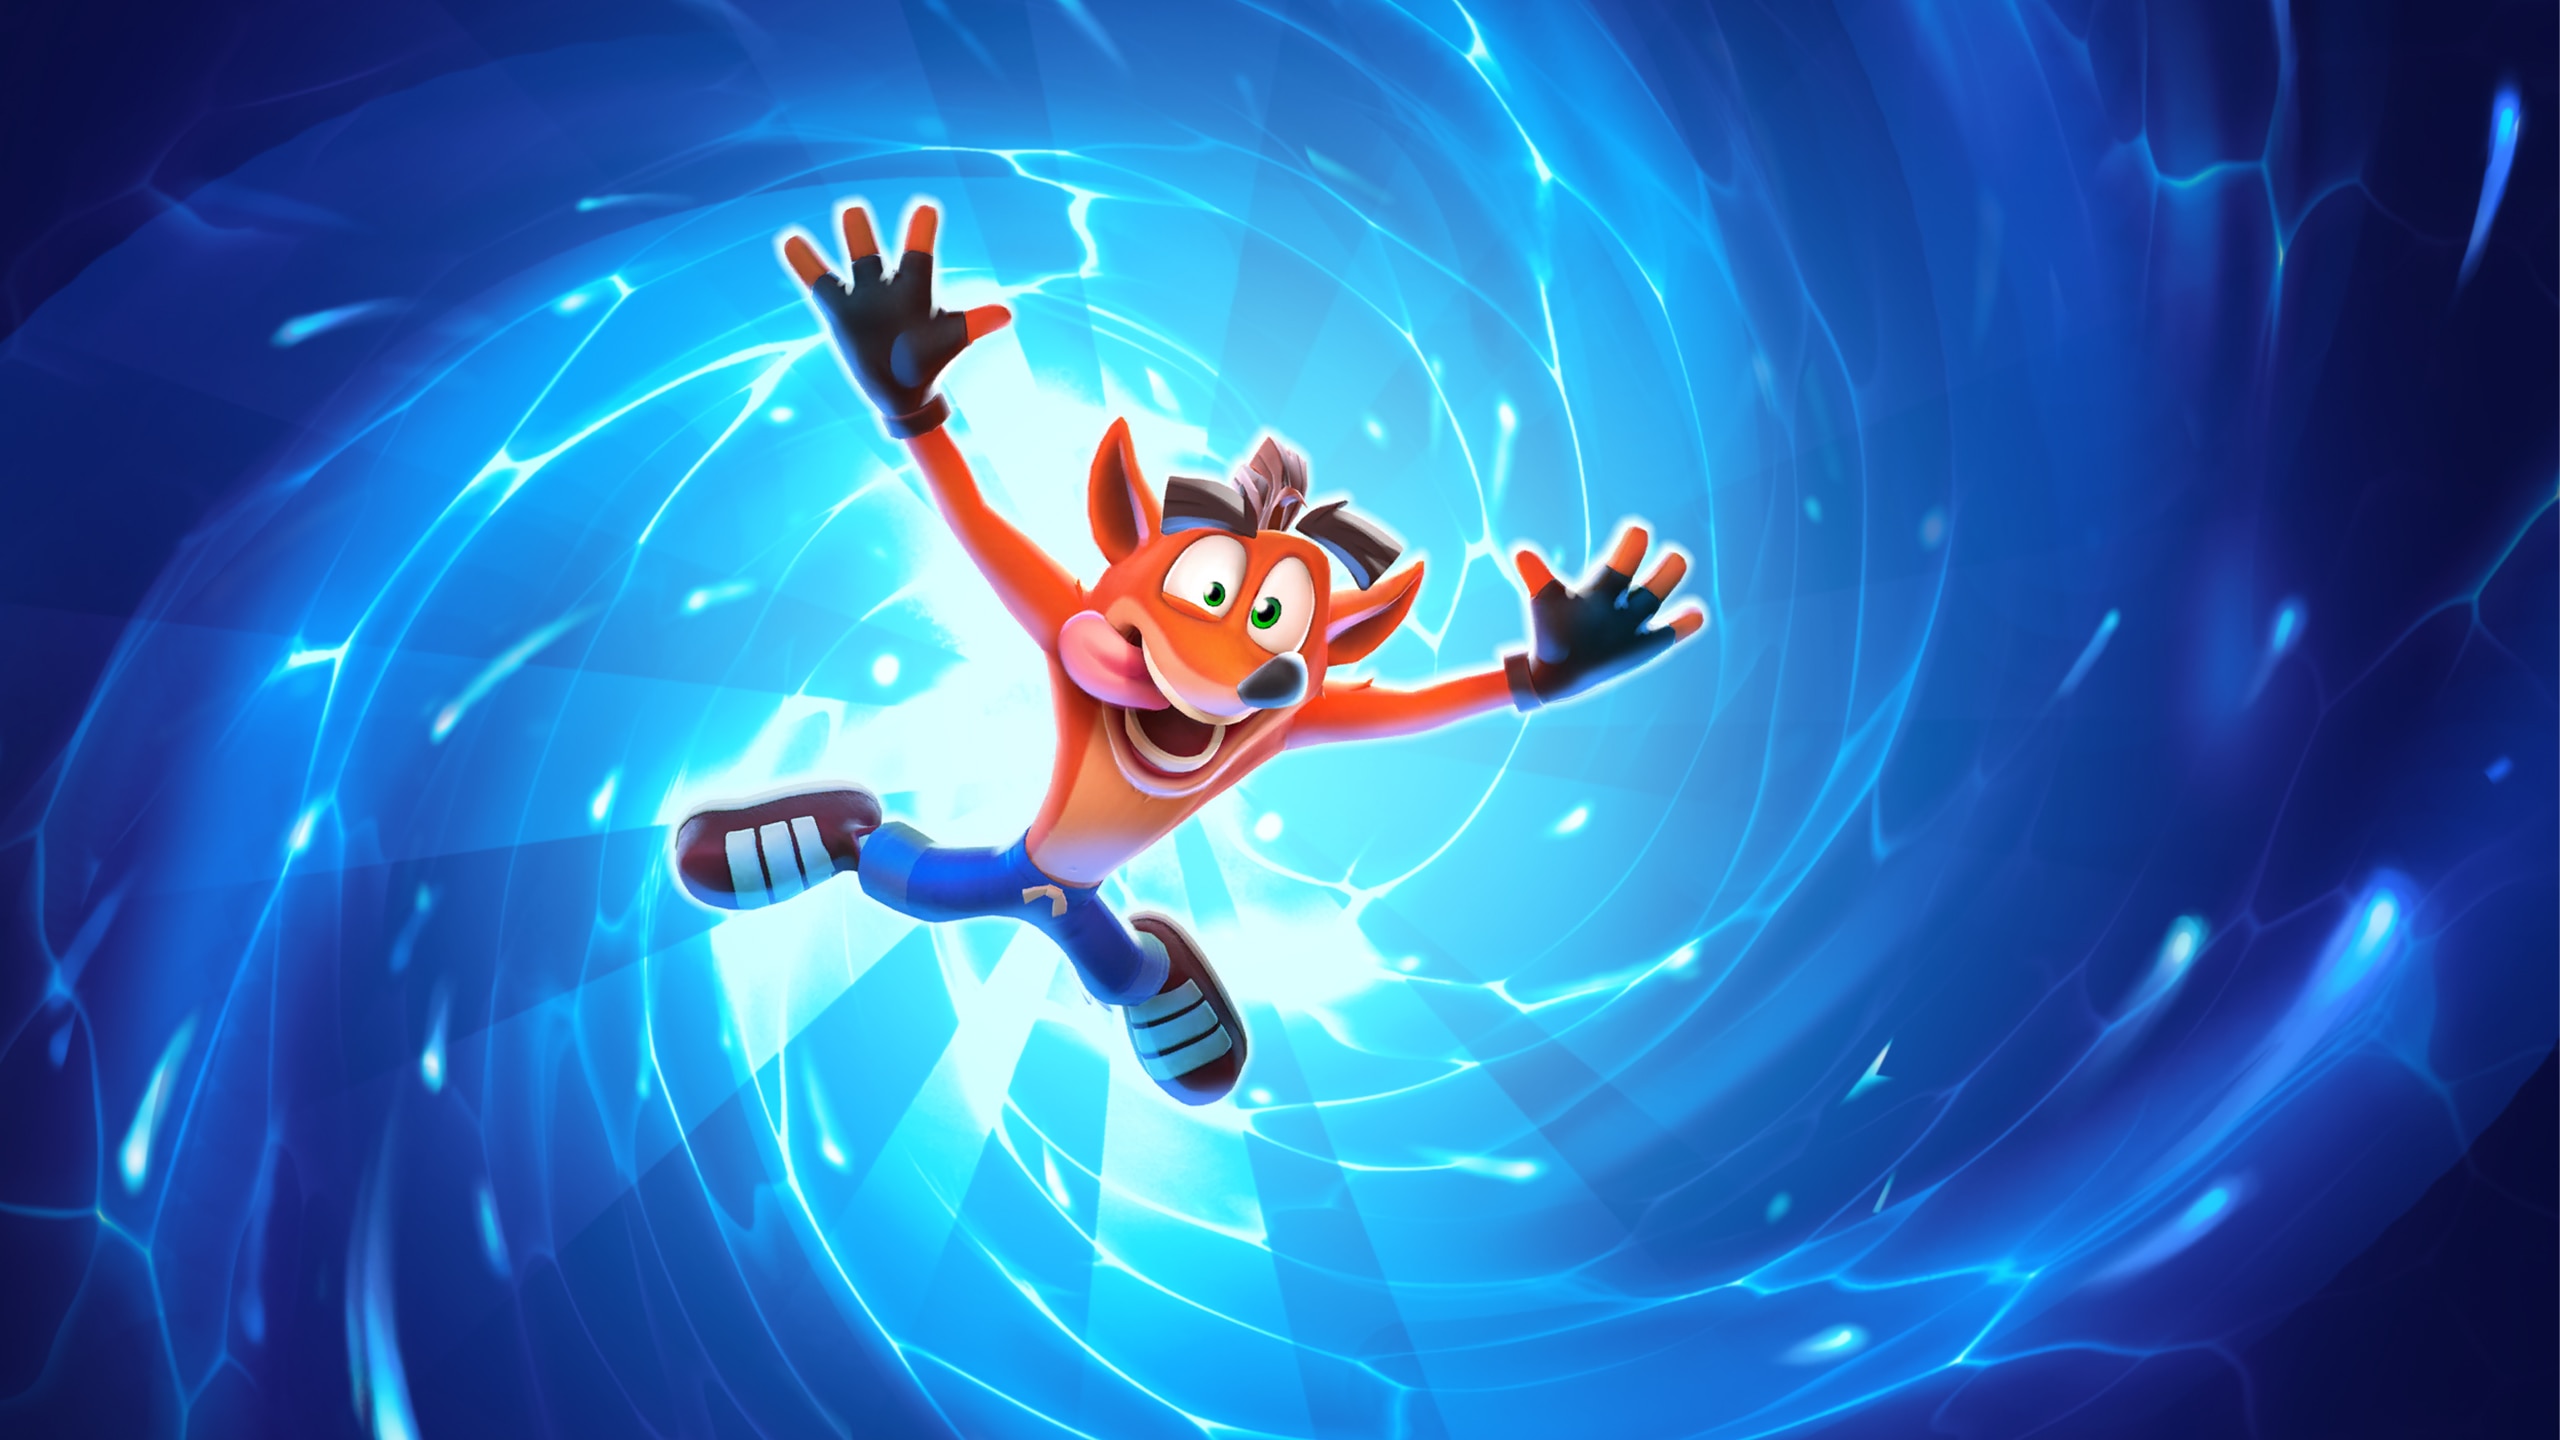 Crash Bandicoot™ 4: It's About Time on Steam